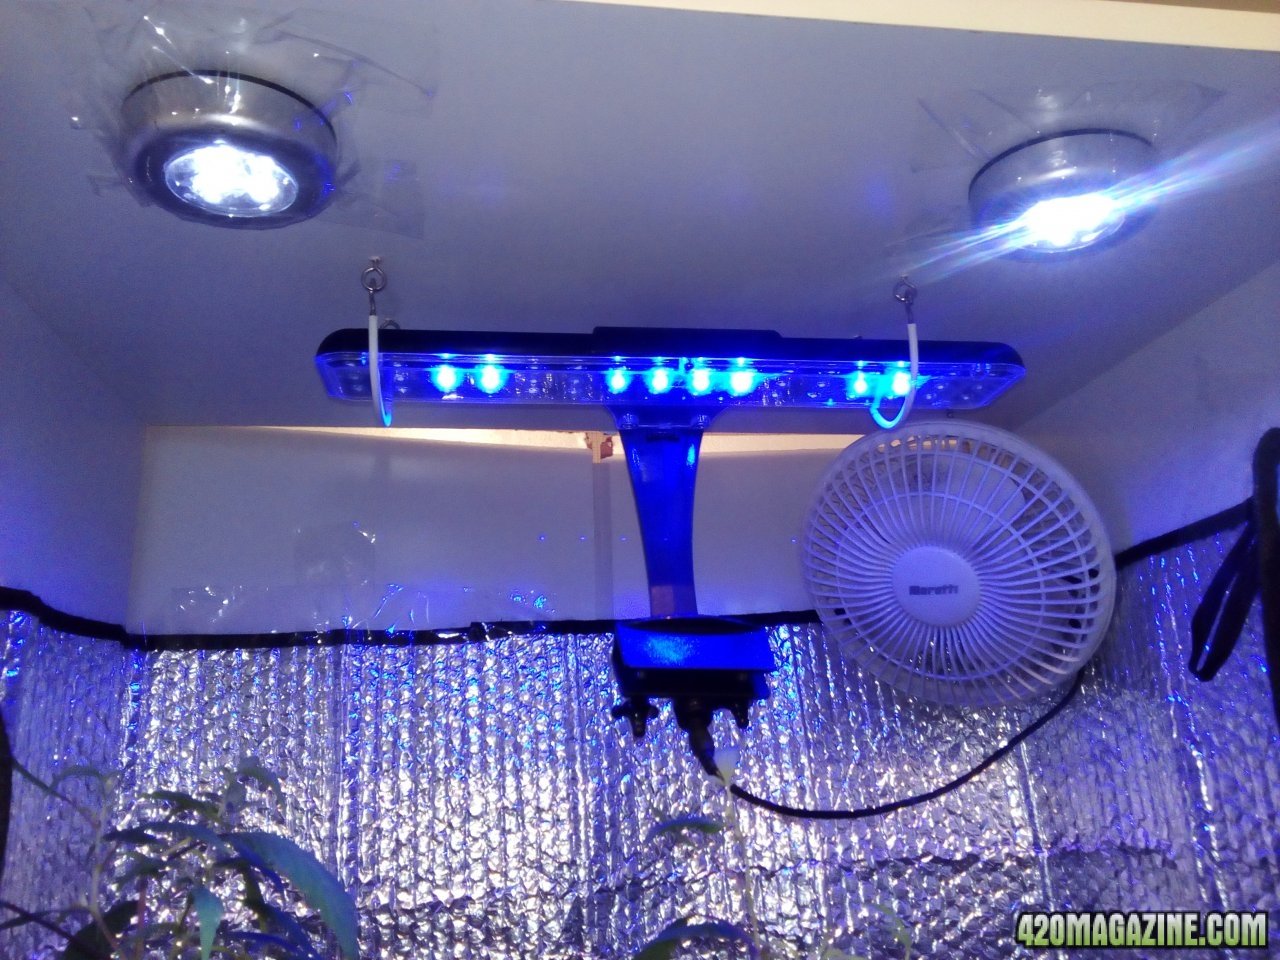 Lights and fan